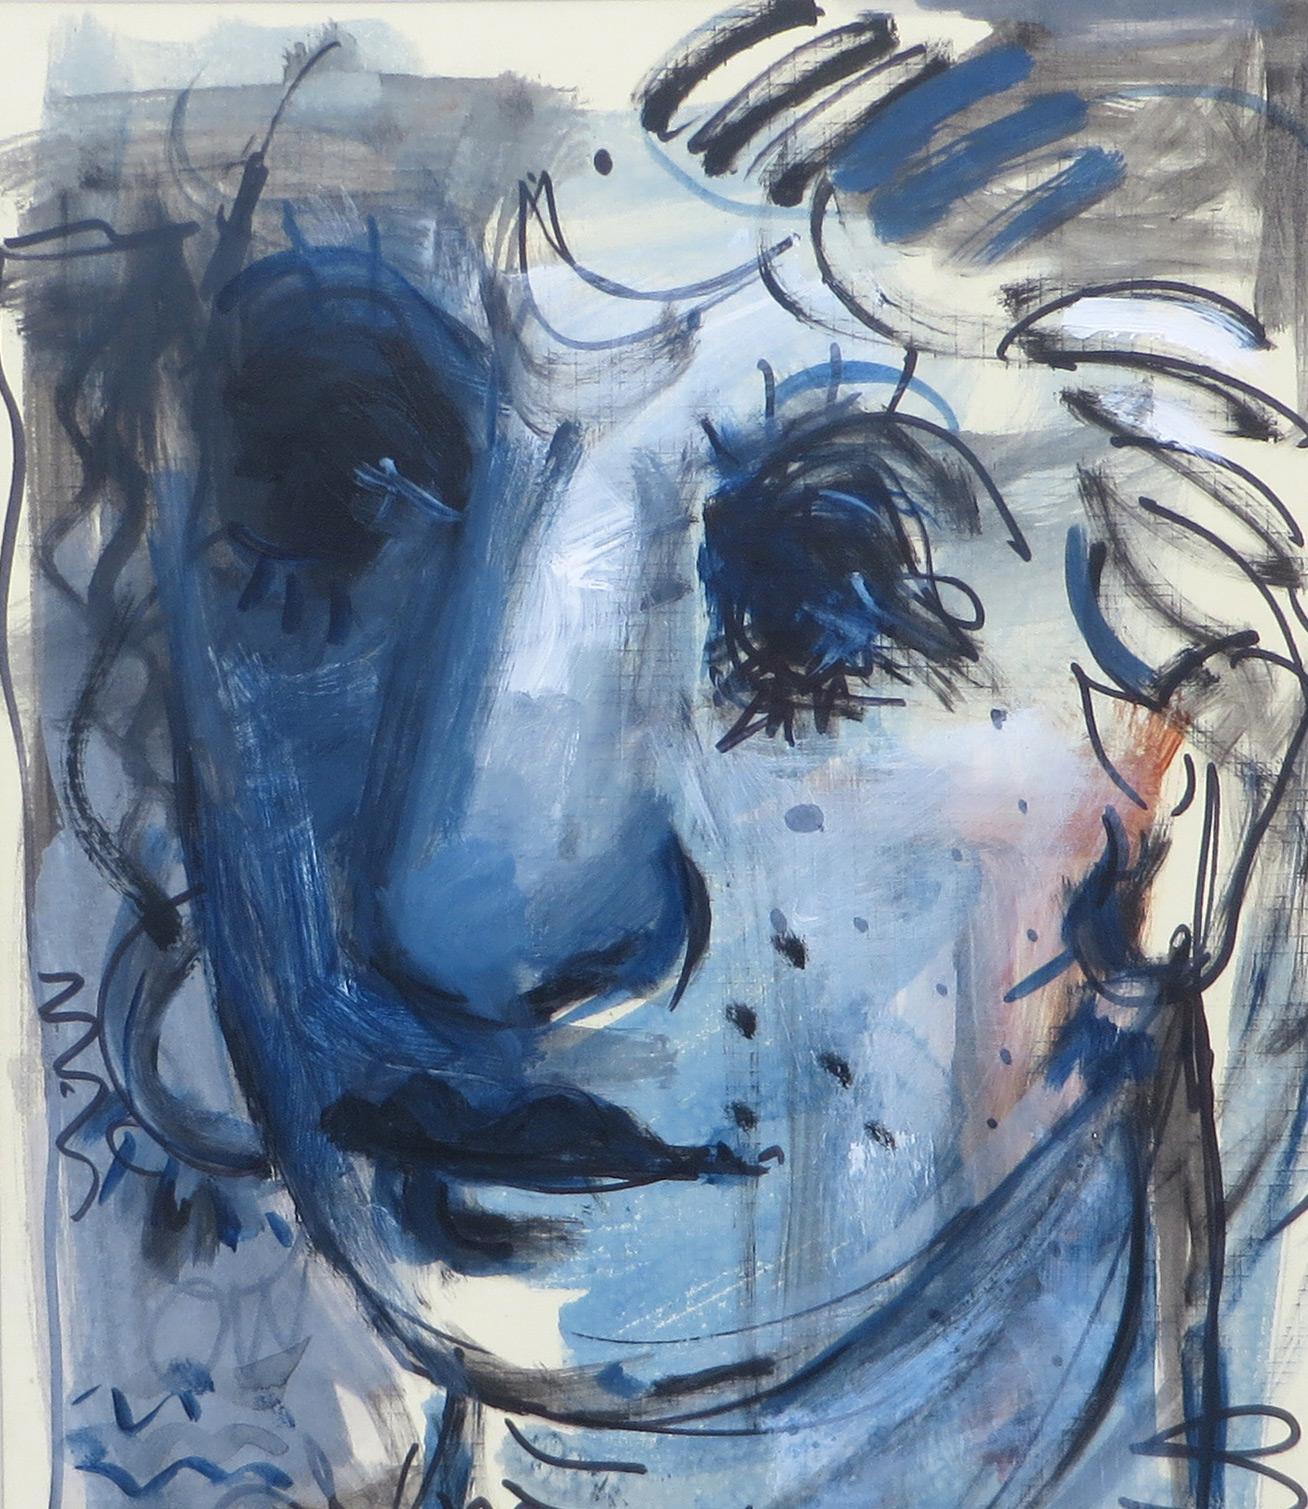 Couple, Faces, Mixed Media, Blue, Black, White by Indian Artist 